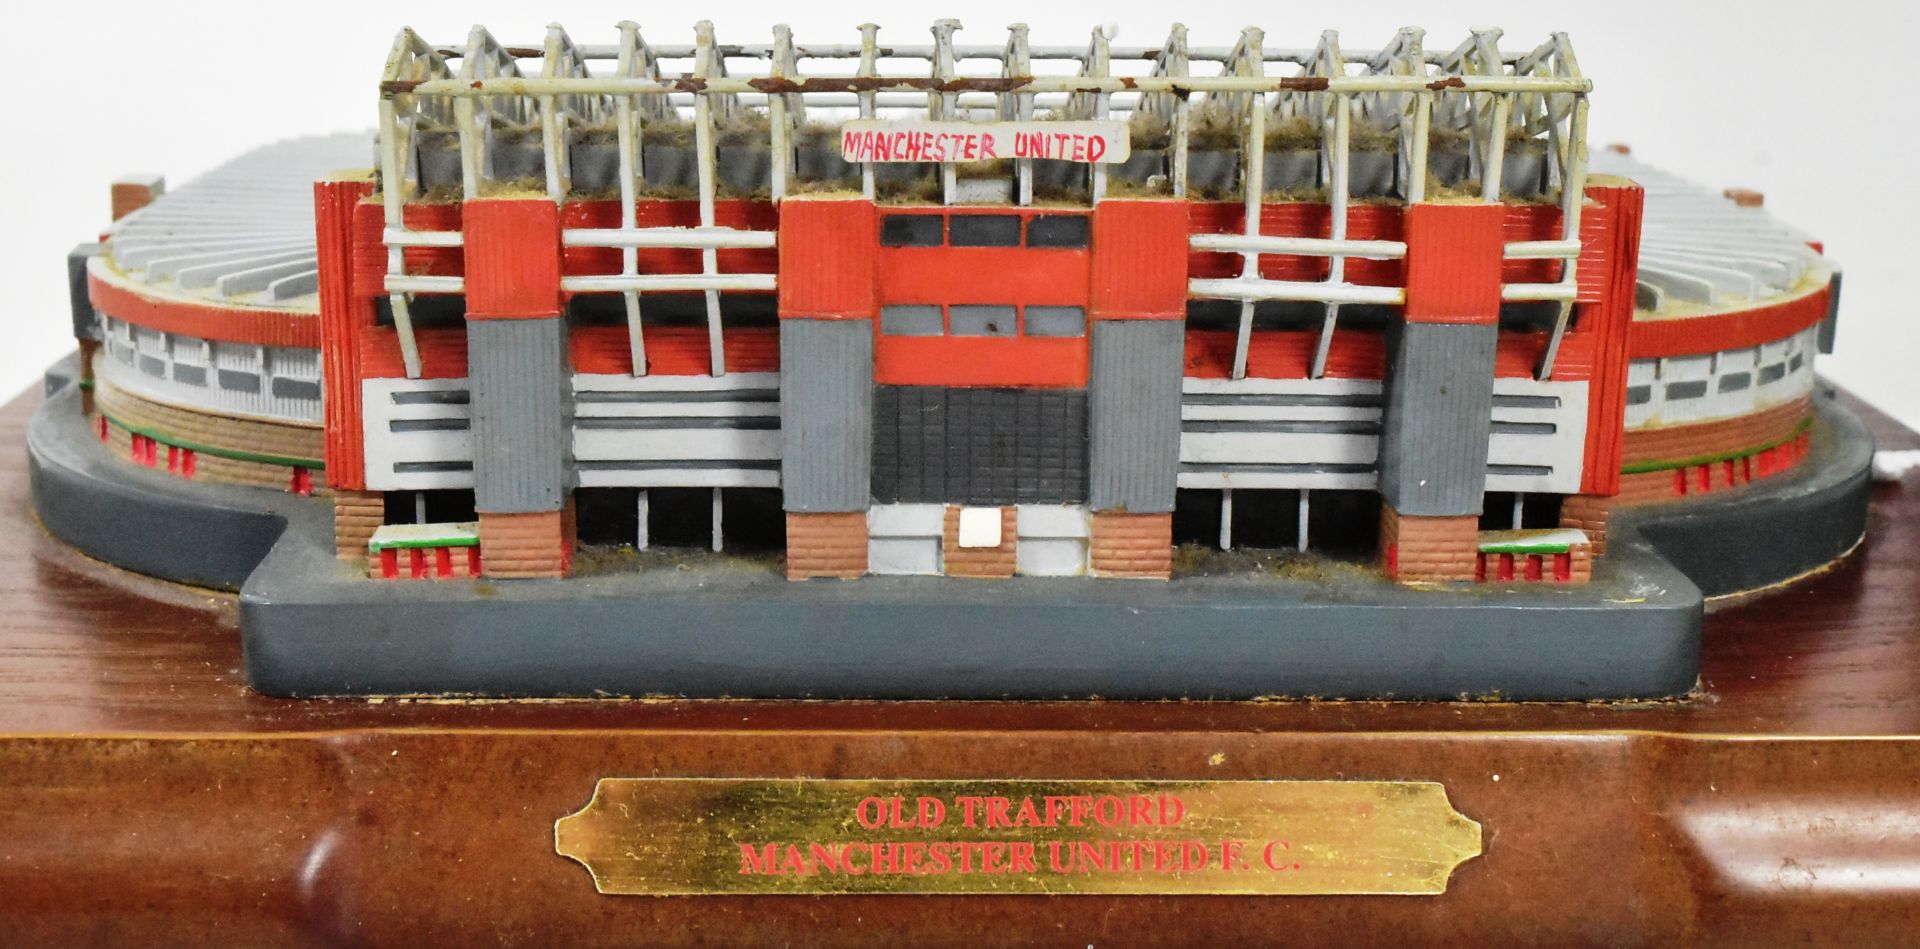 OFFICIAL MANCHESTER UNITED OLD TRAFFORD REPLICA STADIUM MODEL - Image 3 of 5